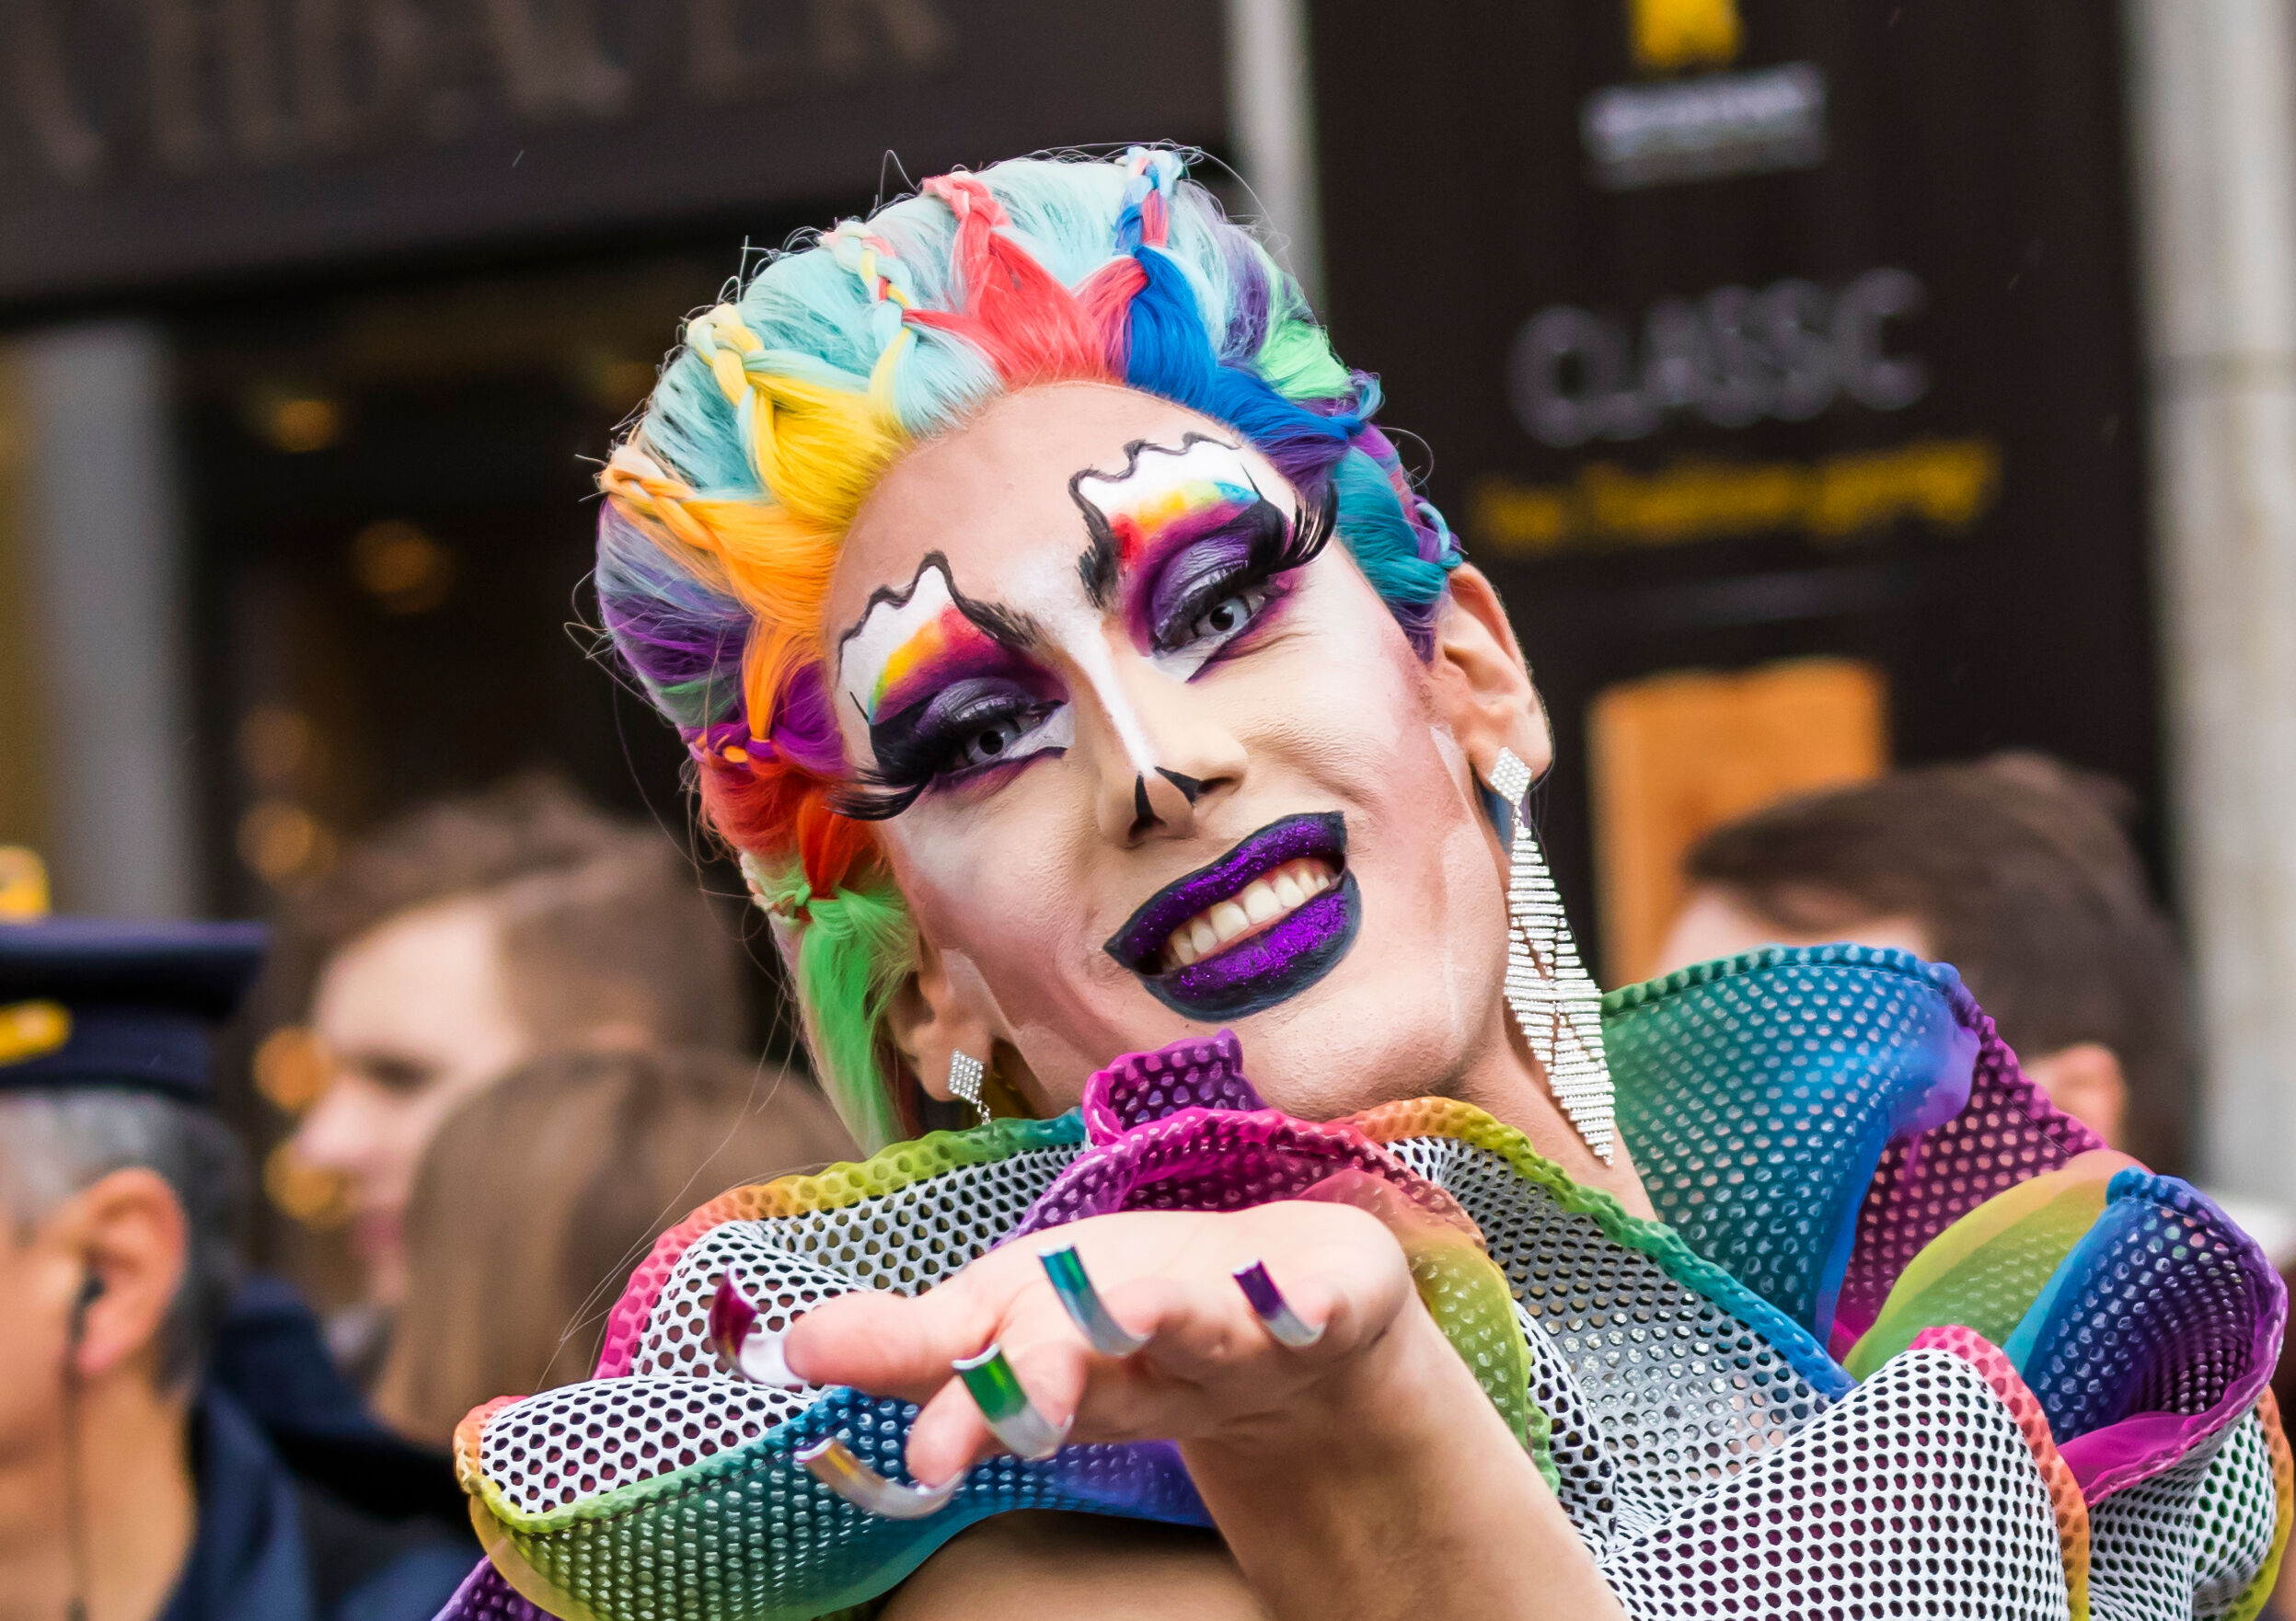 MUNICH, BAVARIA / GERMANY - JULY 13, 2019: A drag queen blowing kisses into the camera attending the Gay Pride parade also known as Christopher Street Day (CSD) in Munich, Germany.